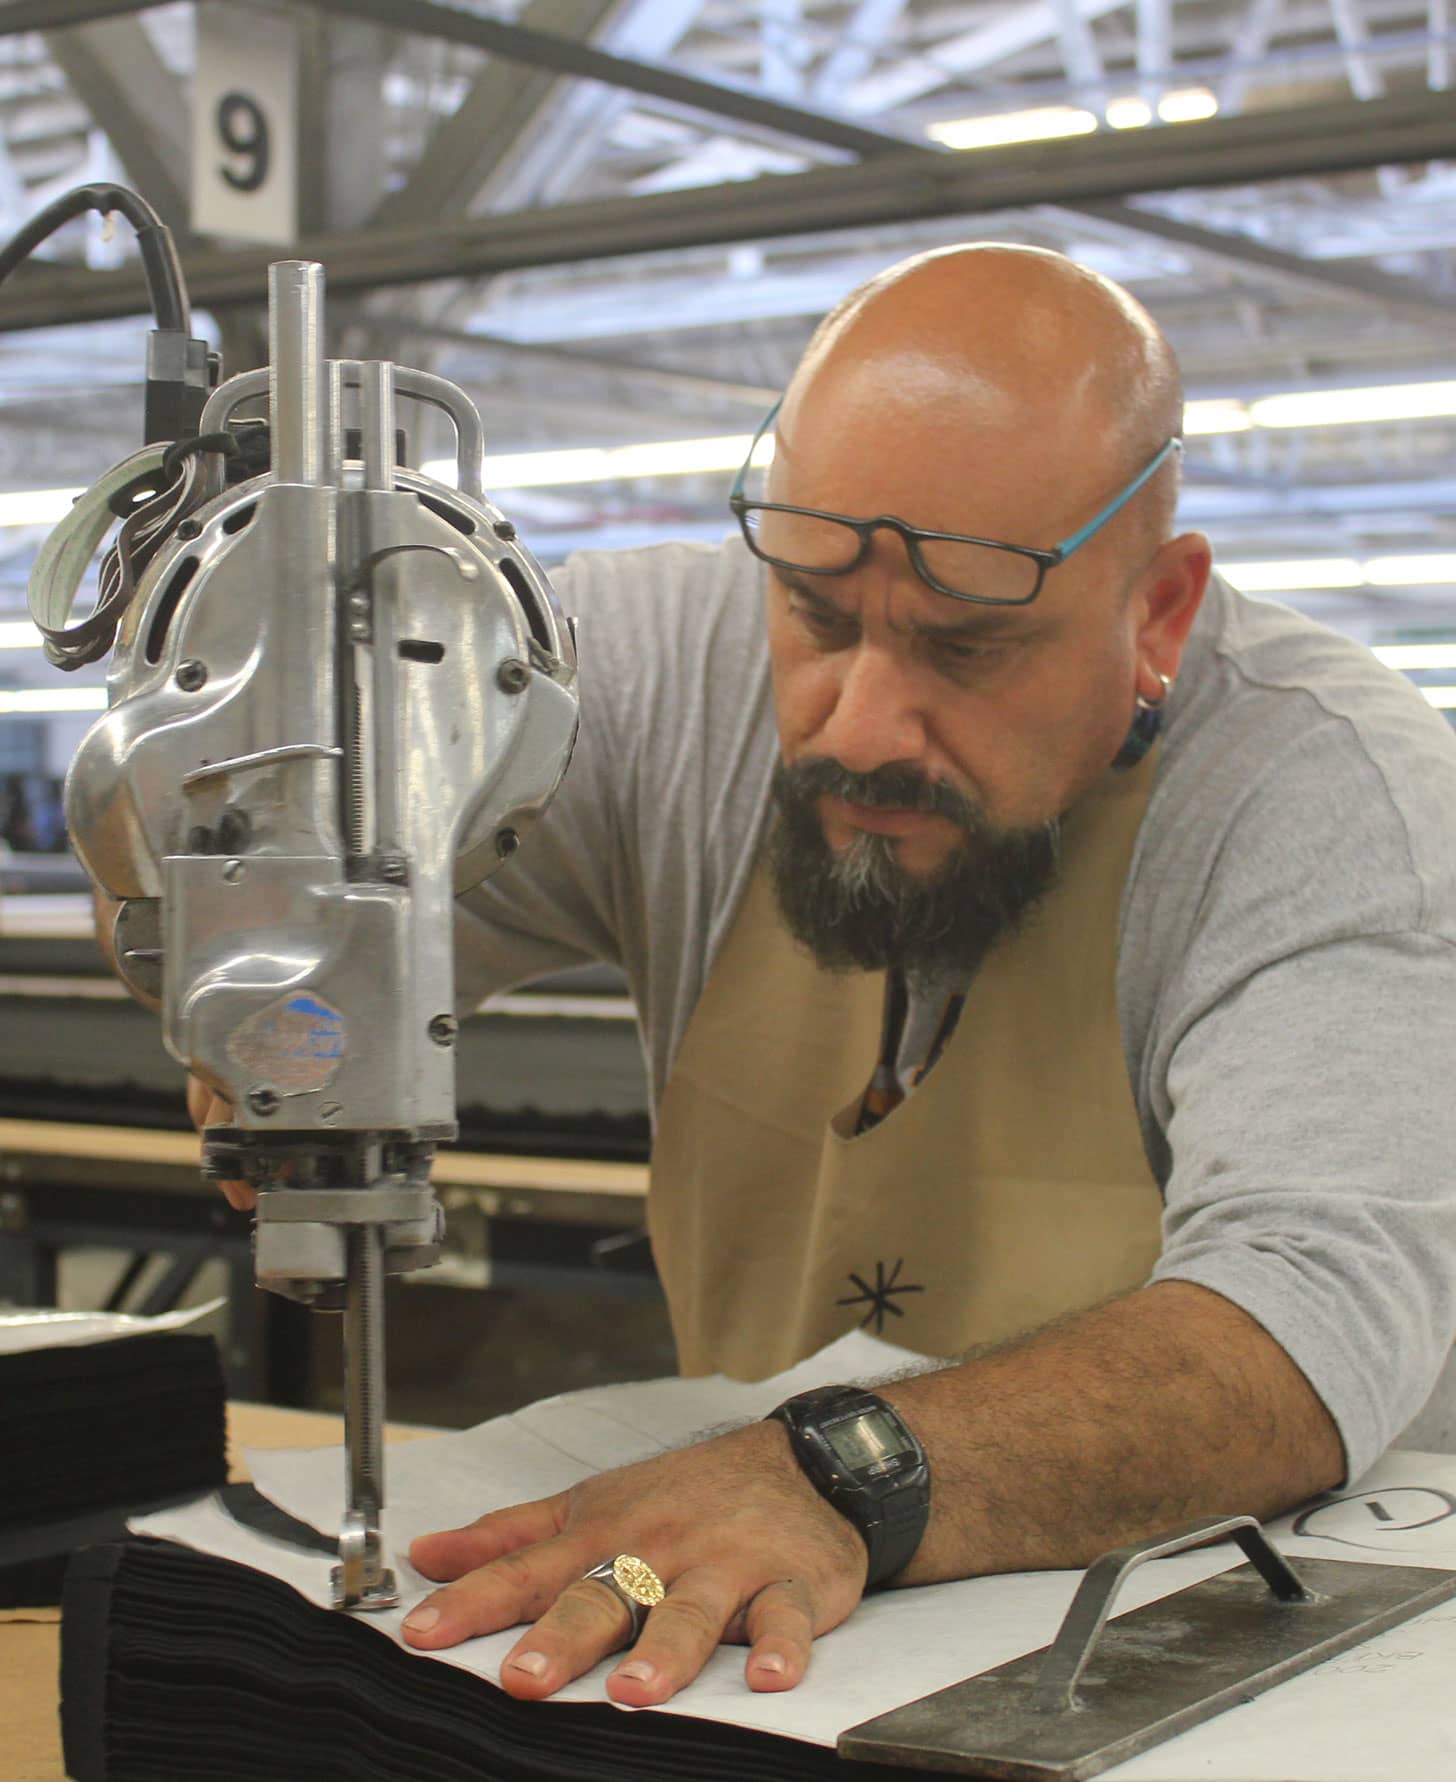 Man with glasses using a straight knife cutting machine to cut fabric